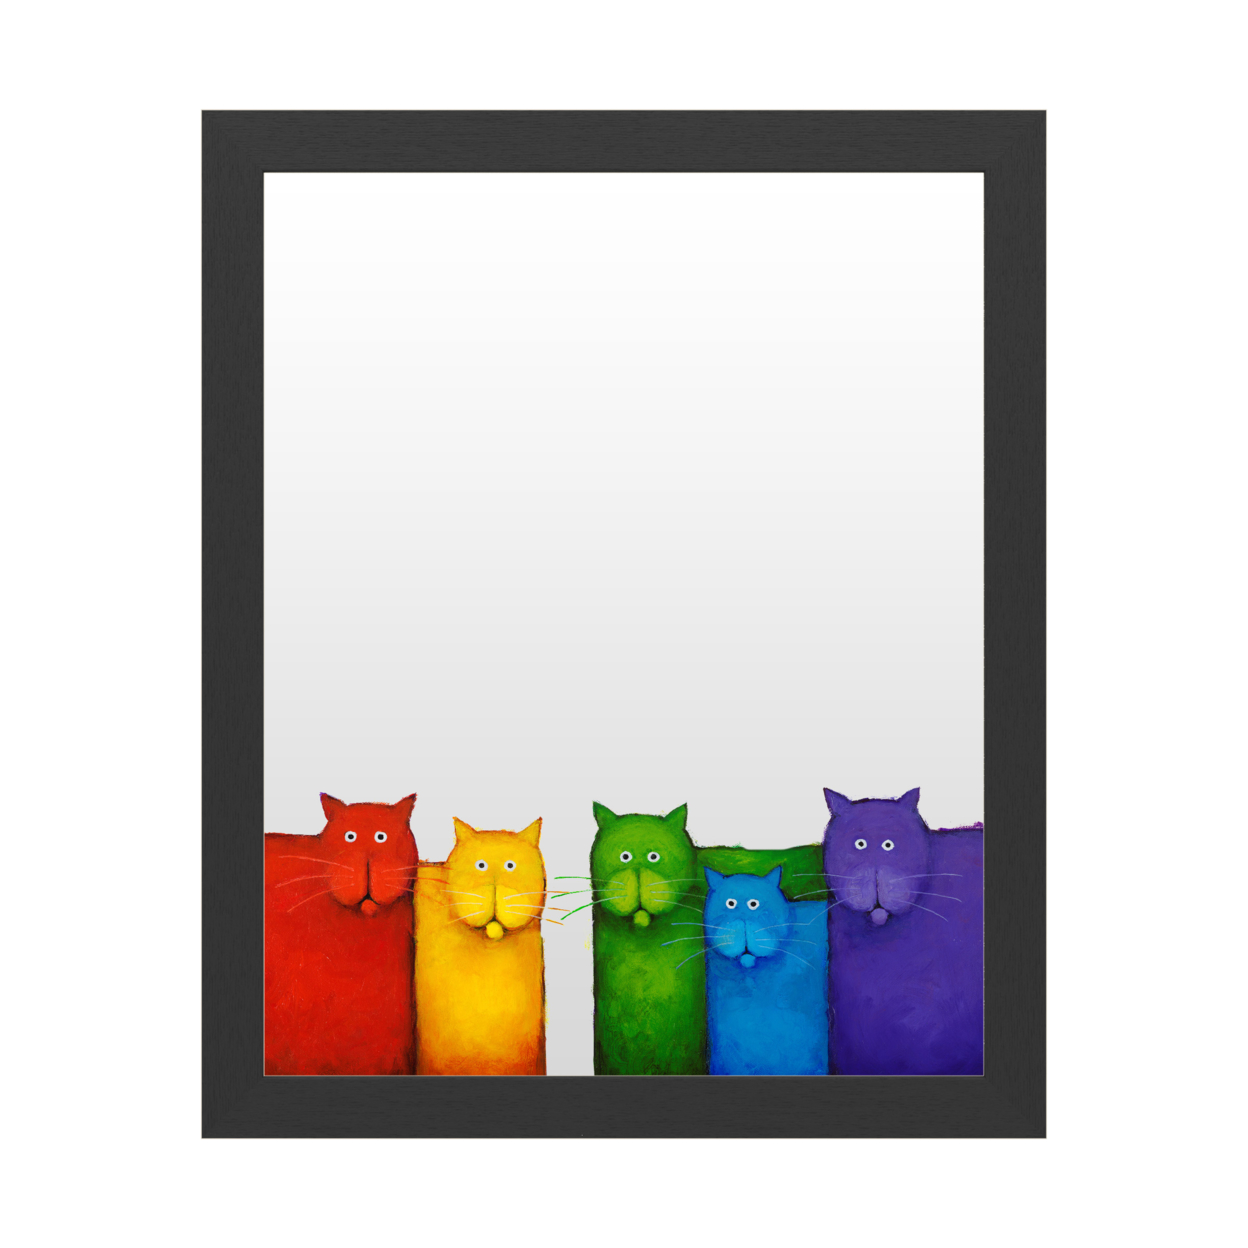 Dry Erase 16 X 20 Marker Board With Printed Artwork - Daniel Patrick Kessler Rainbow Cats White Board - Ready To Hang